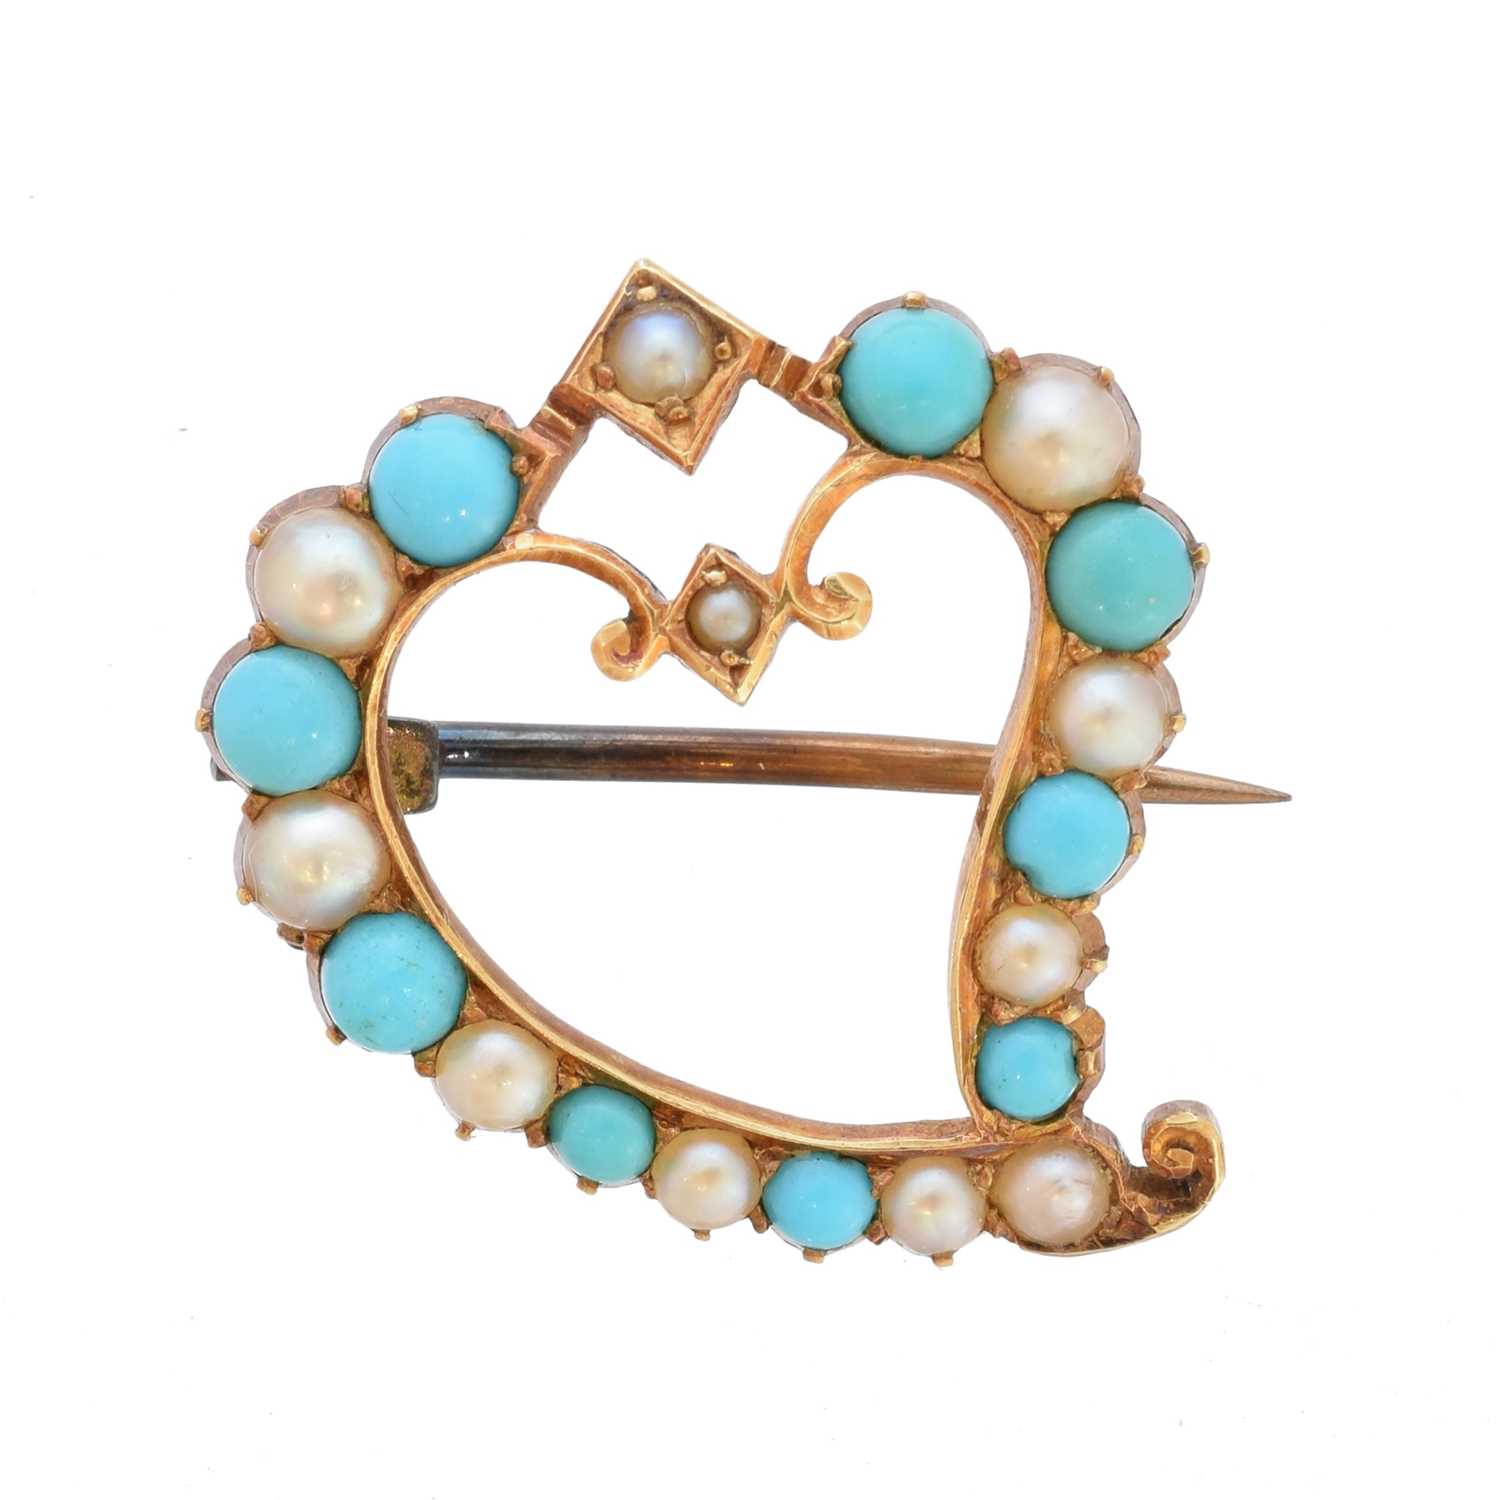 Lot 14 - An early 20th century turquoise and split pearl brooch